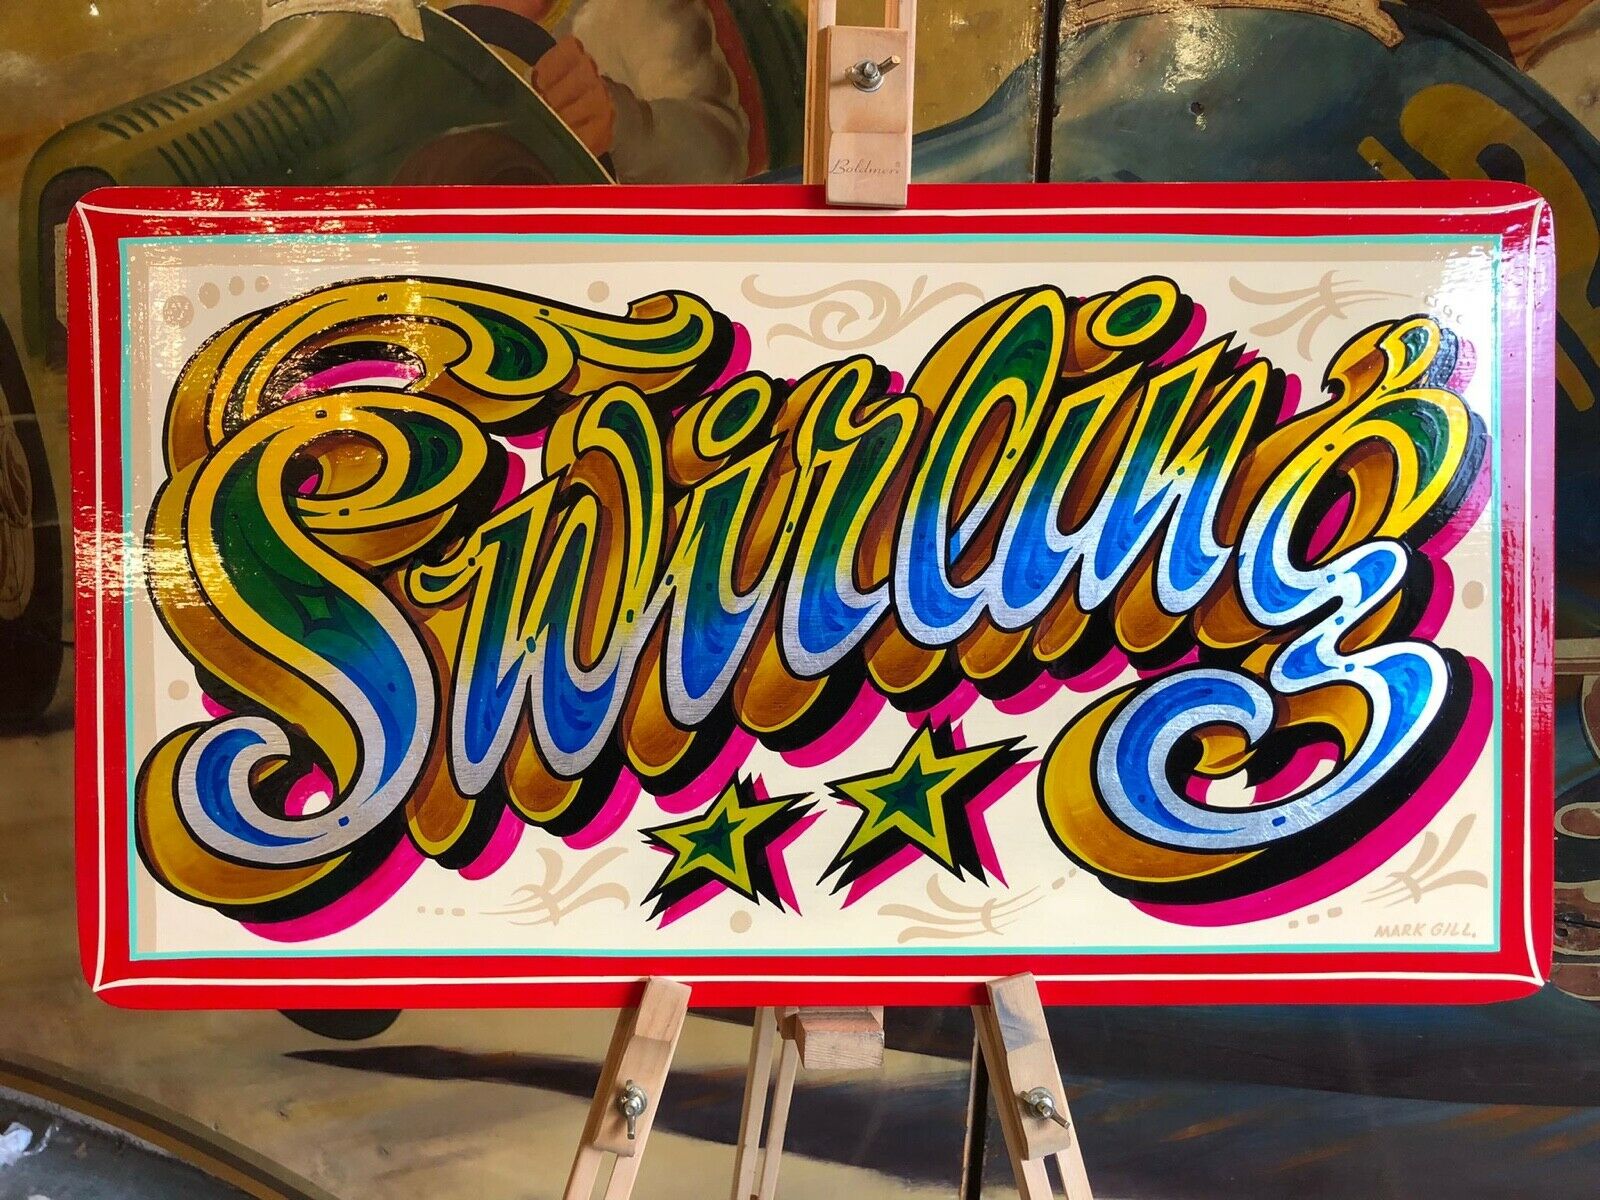 'Swirling' painted in fairground lettering style.